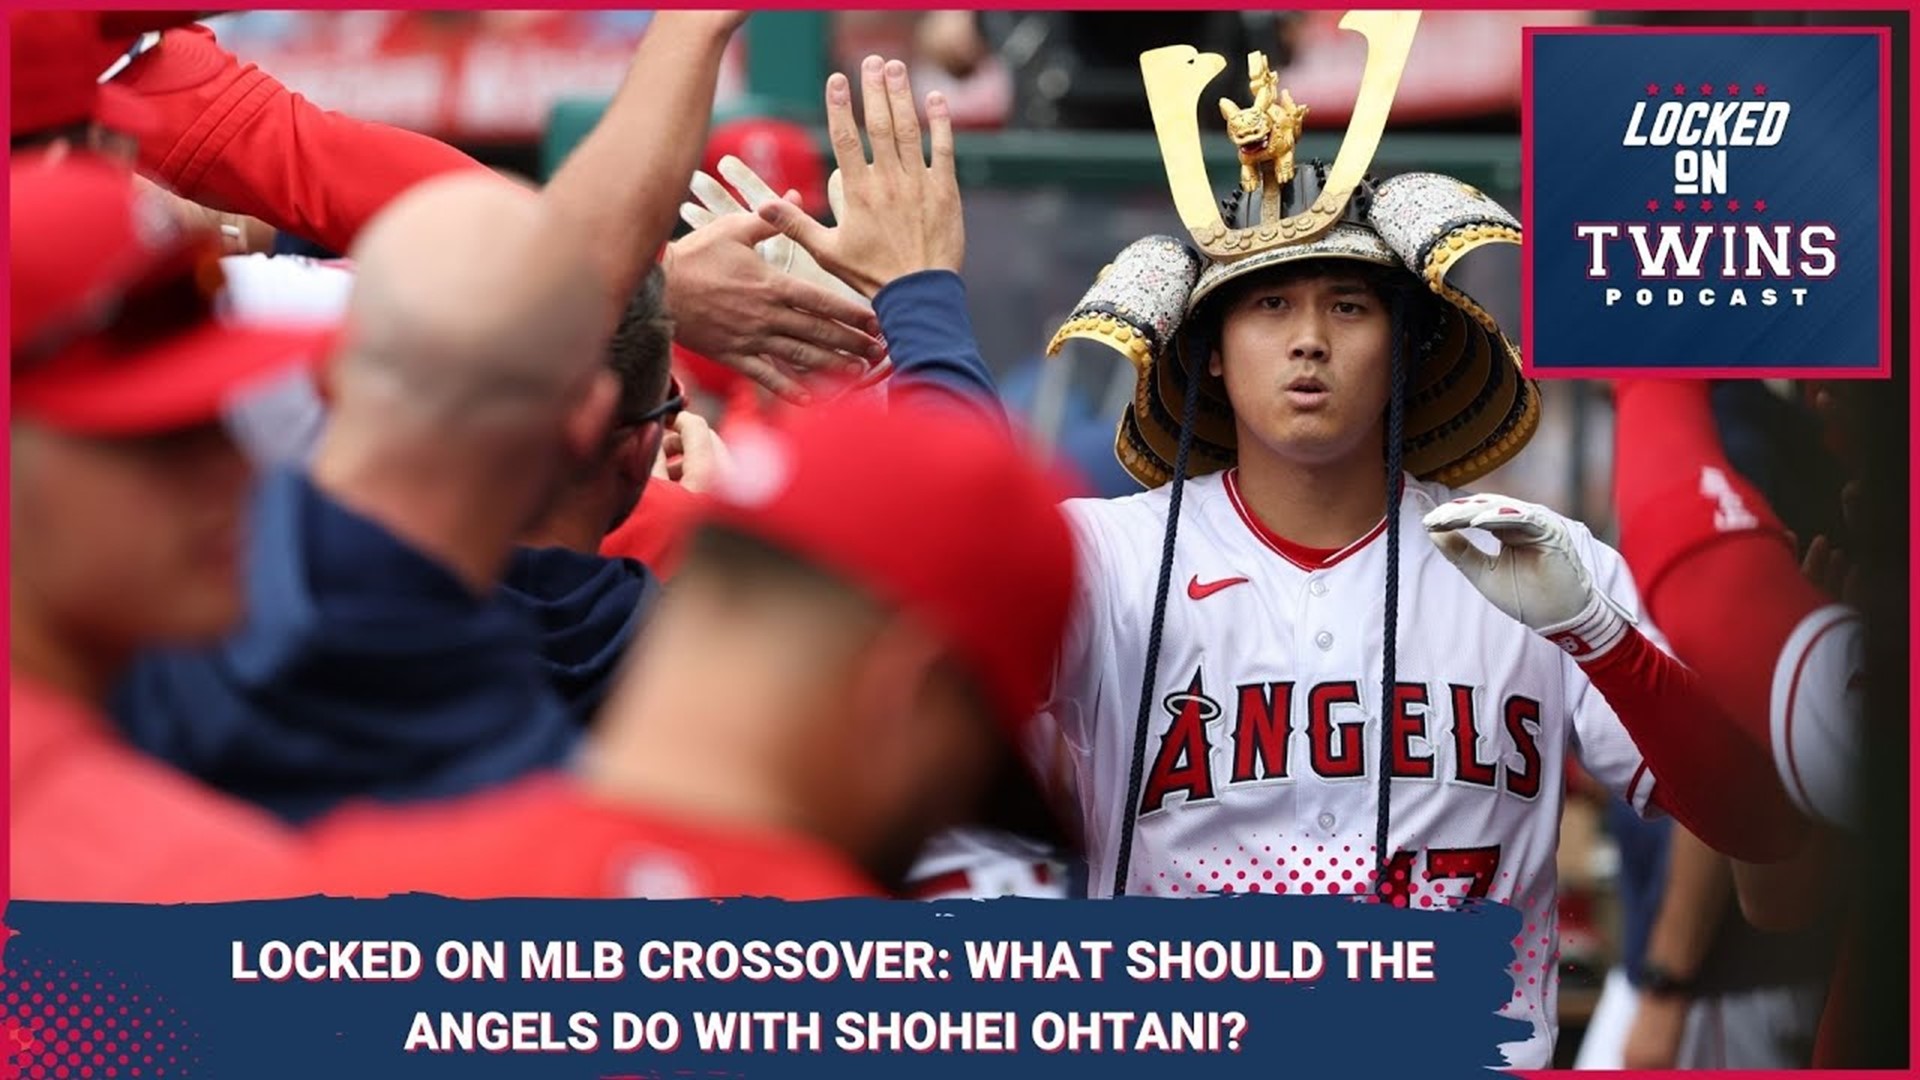 Locked On MLB Crossover: What Should the Angels do with Shohei Ohtani?